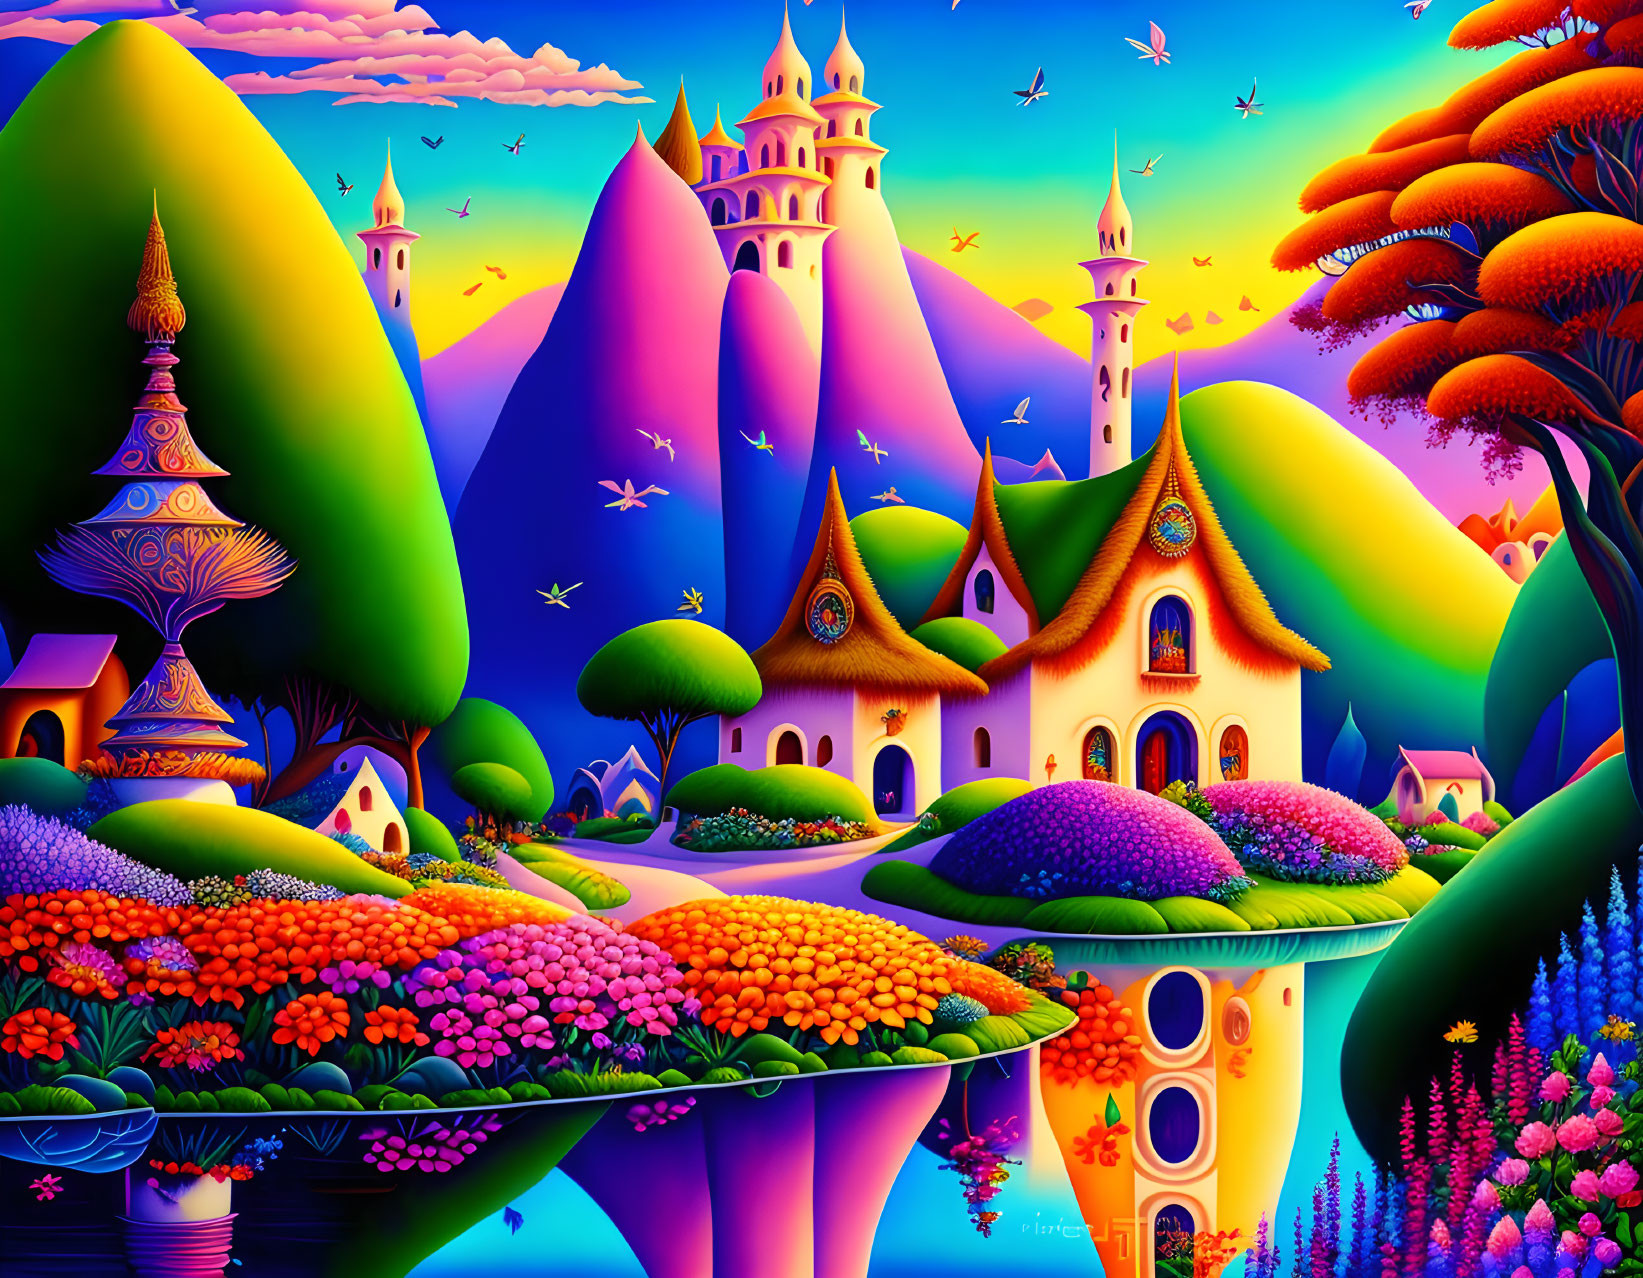 Colorful fantasy landscape with castles, trees, flowers, river, and birds